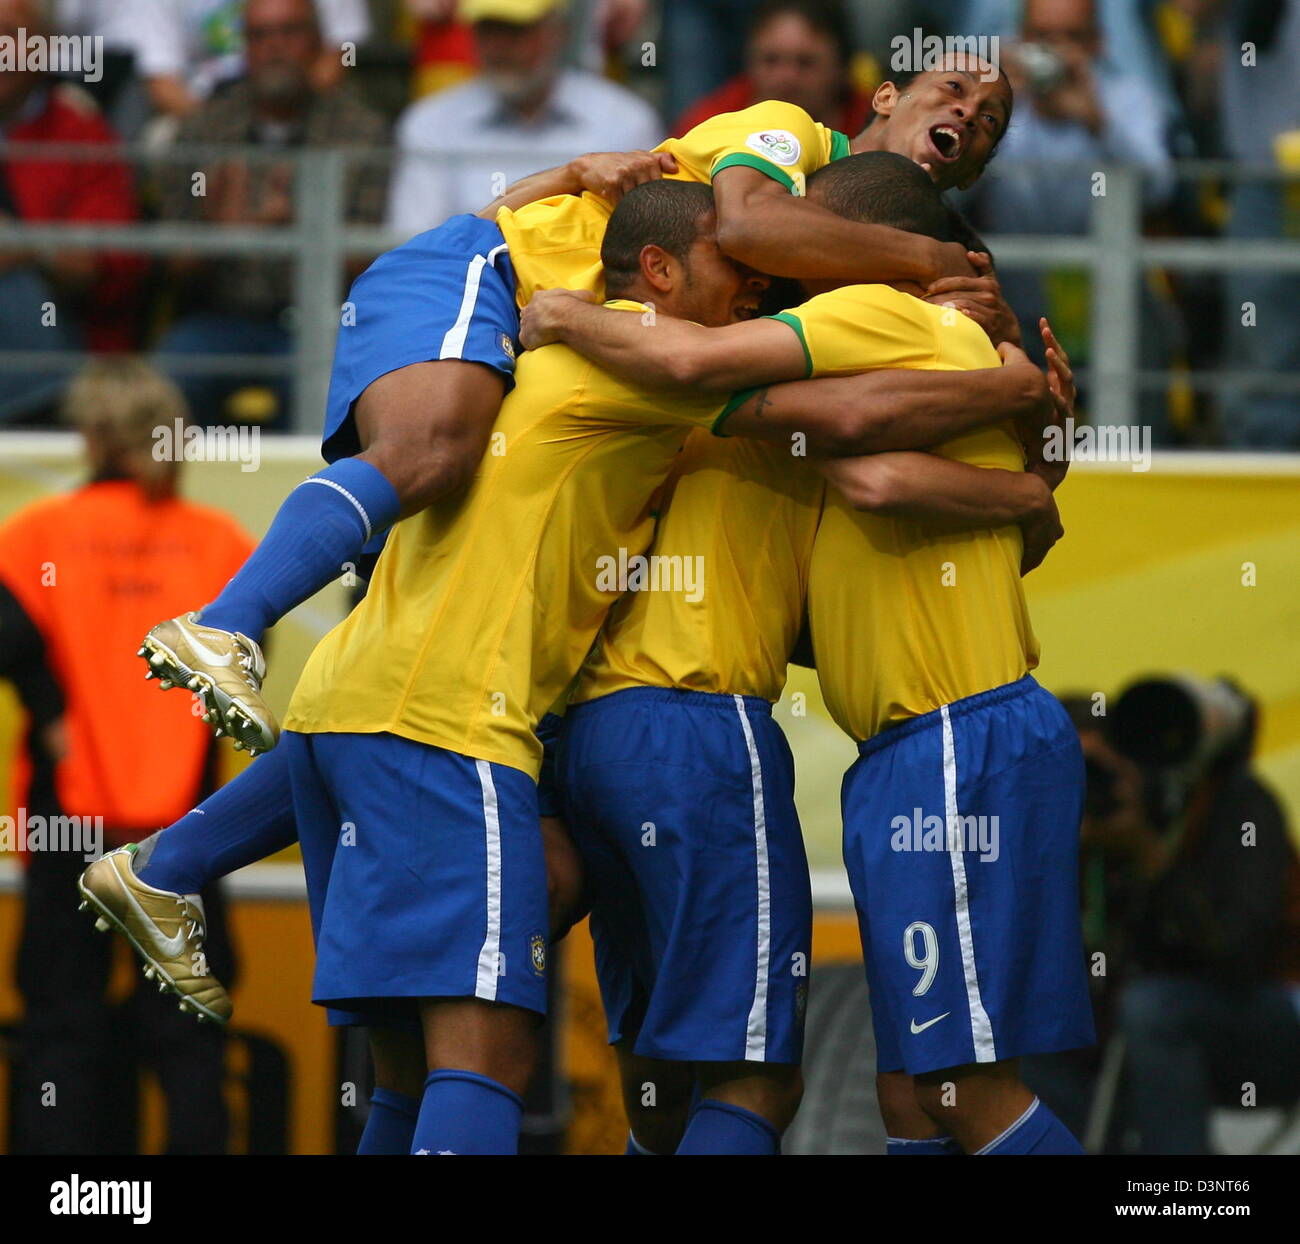 Ronaldo (R) from Brazil celebrates with his teammates Ronaldinho (Up) and Adriano (M) after scoring the 1-0 lead during the 2nd round match of the 2006 FIFA World Cup between Brazil and Ghana in Dortmund, Germany, Tuesday, 27 June 2006. Photo: FELIX HEYDER +++ Mobile Services OUT +++ Please refer to FIFA's terms and conditions Stock Photo